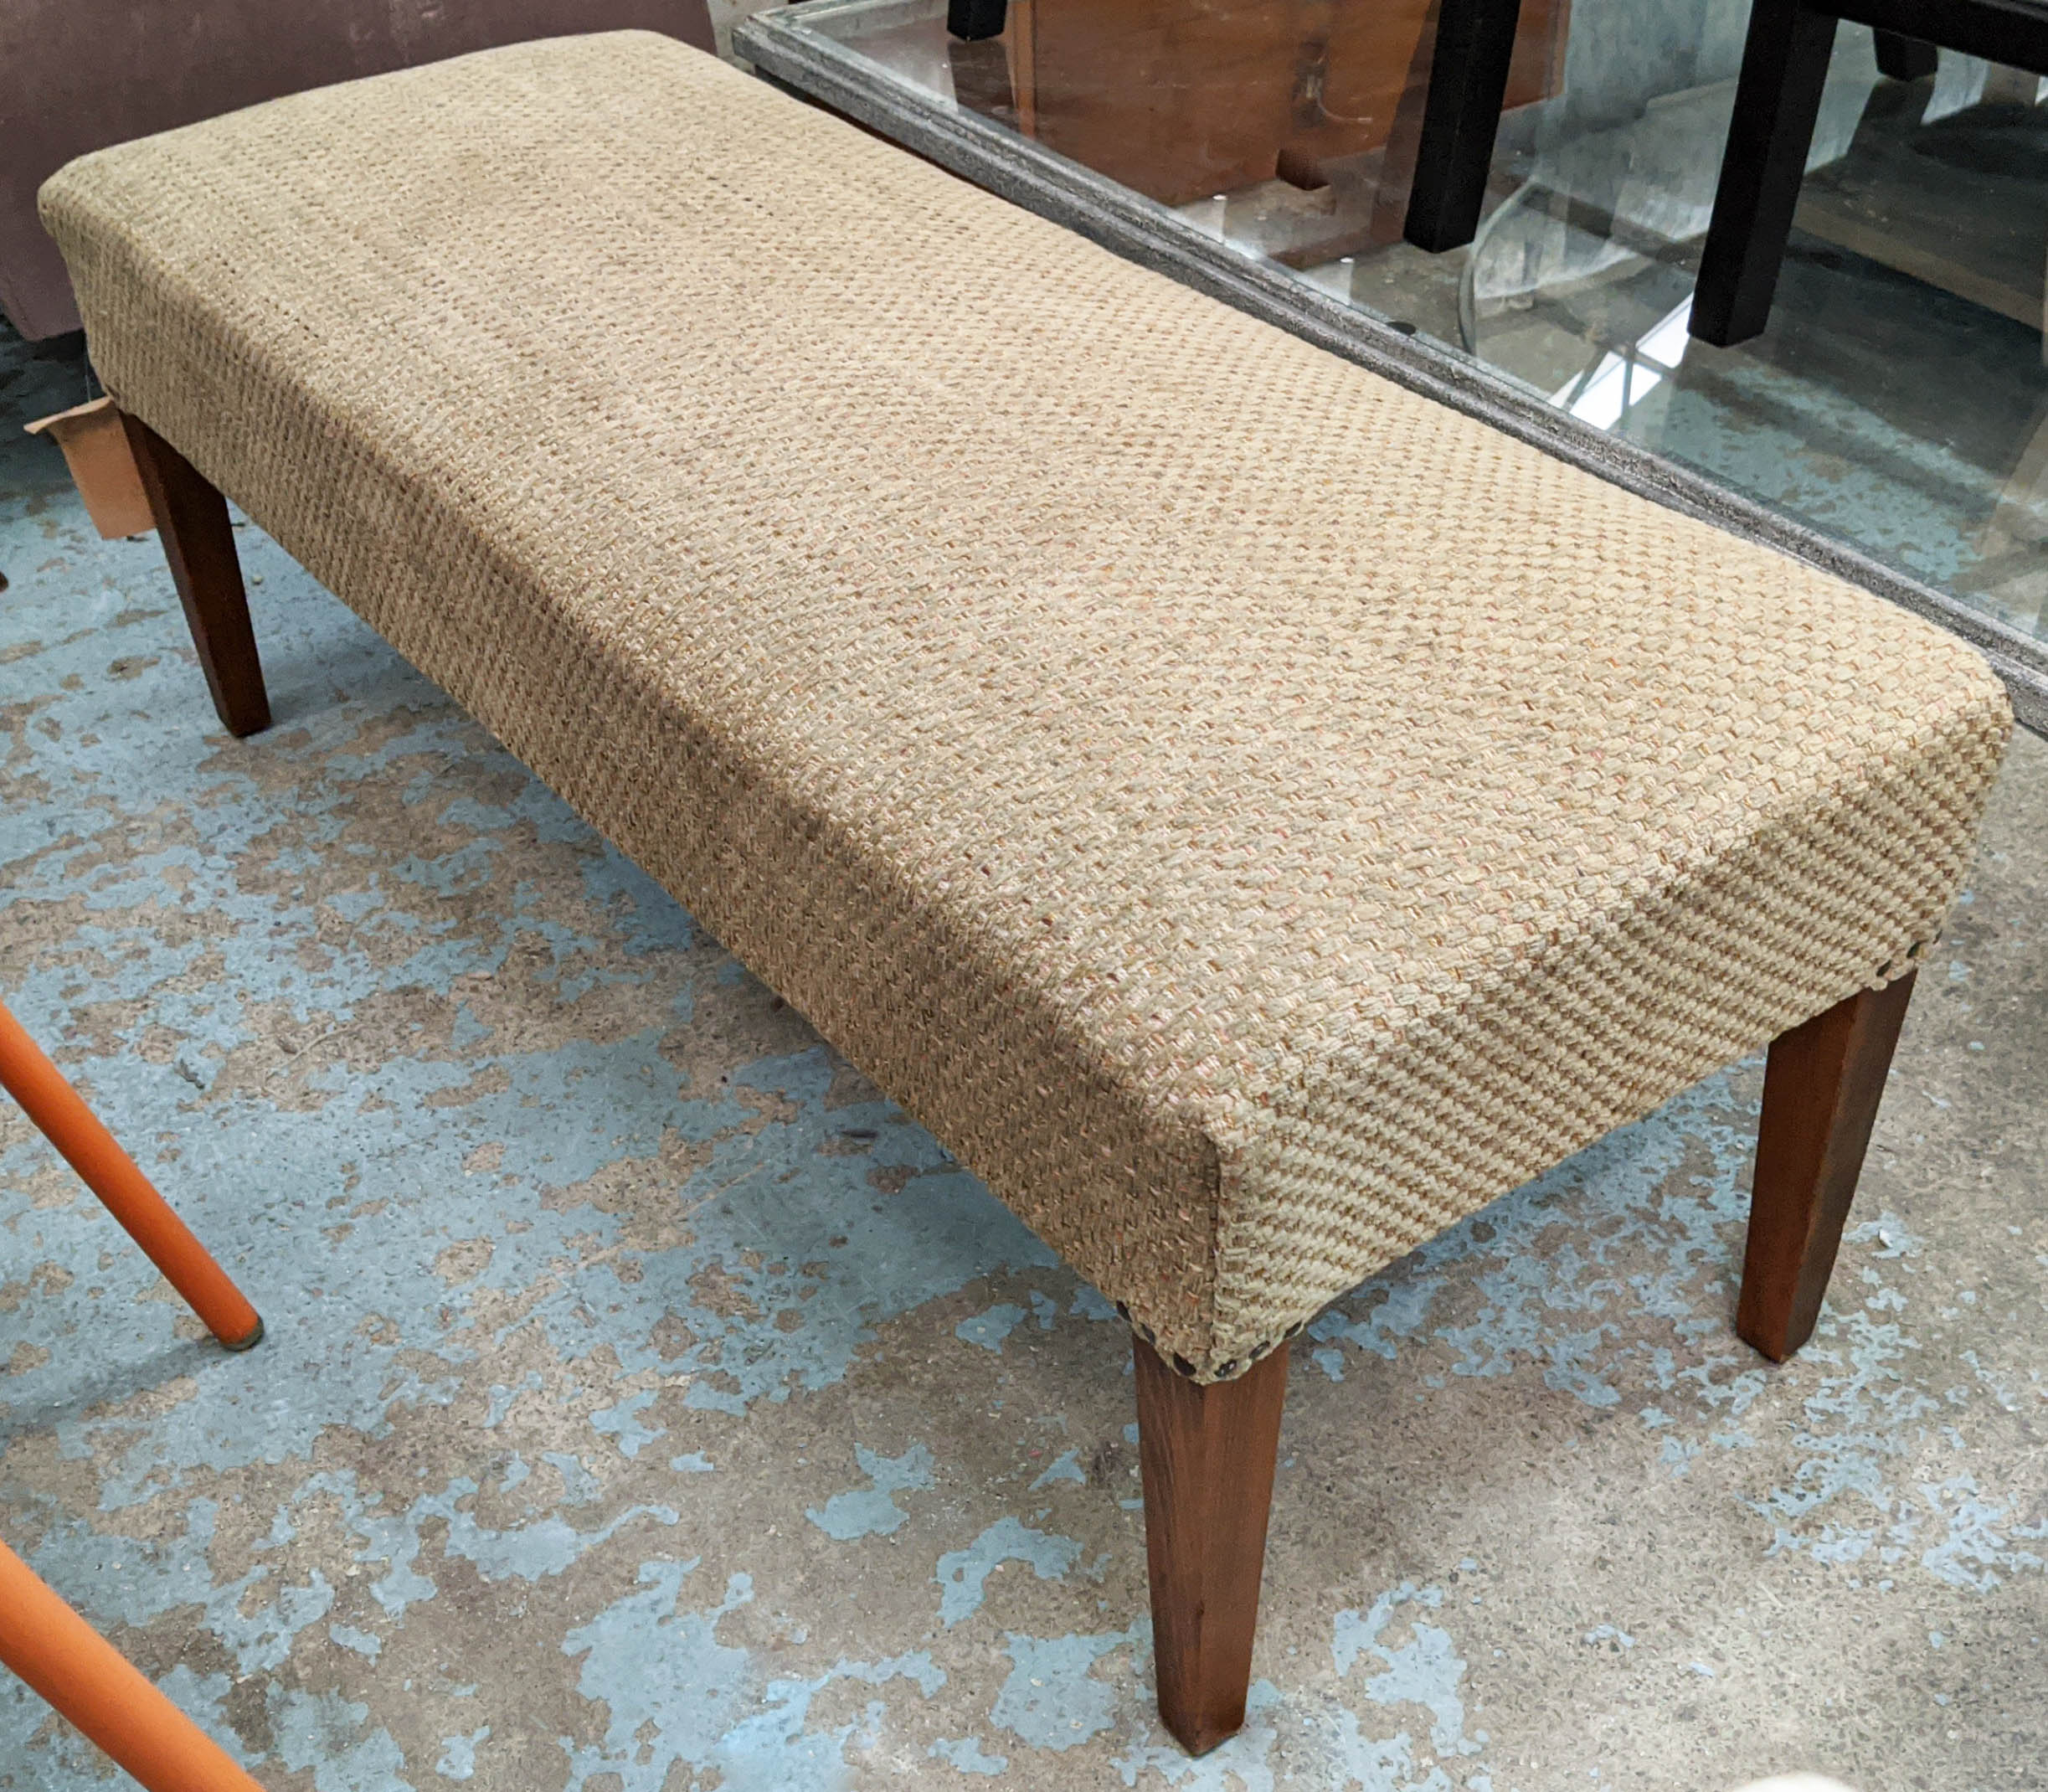 WINDOW SEAT, thick woven upholstery, studded detail, 125cm x 49cm x 49cm.